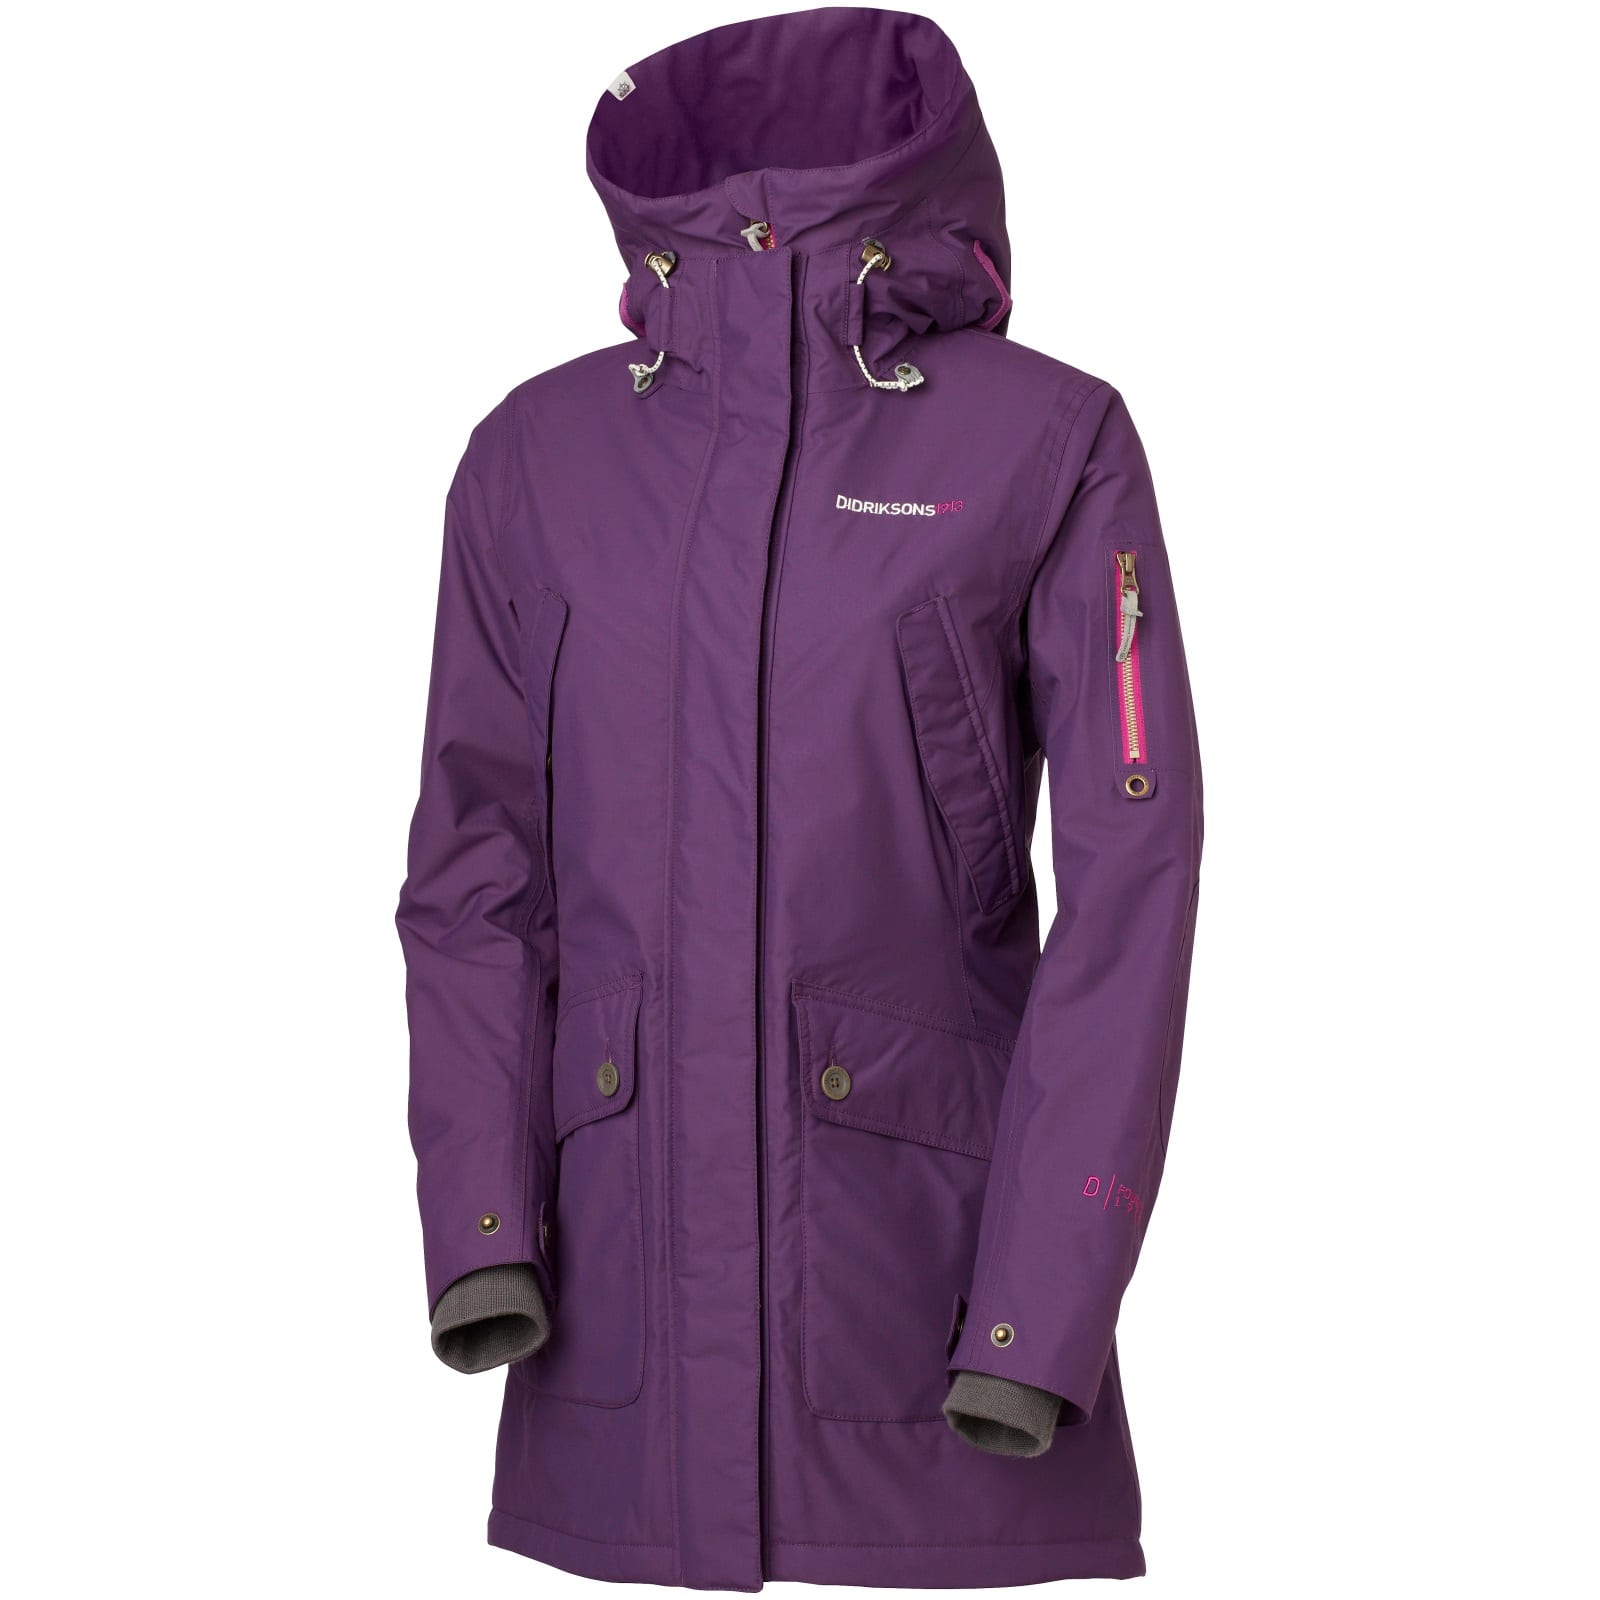 Buy Didriksons Tilde Women's Parka from Outnorth